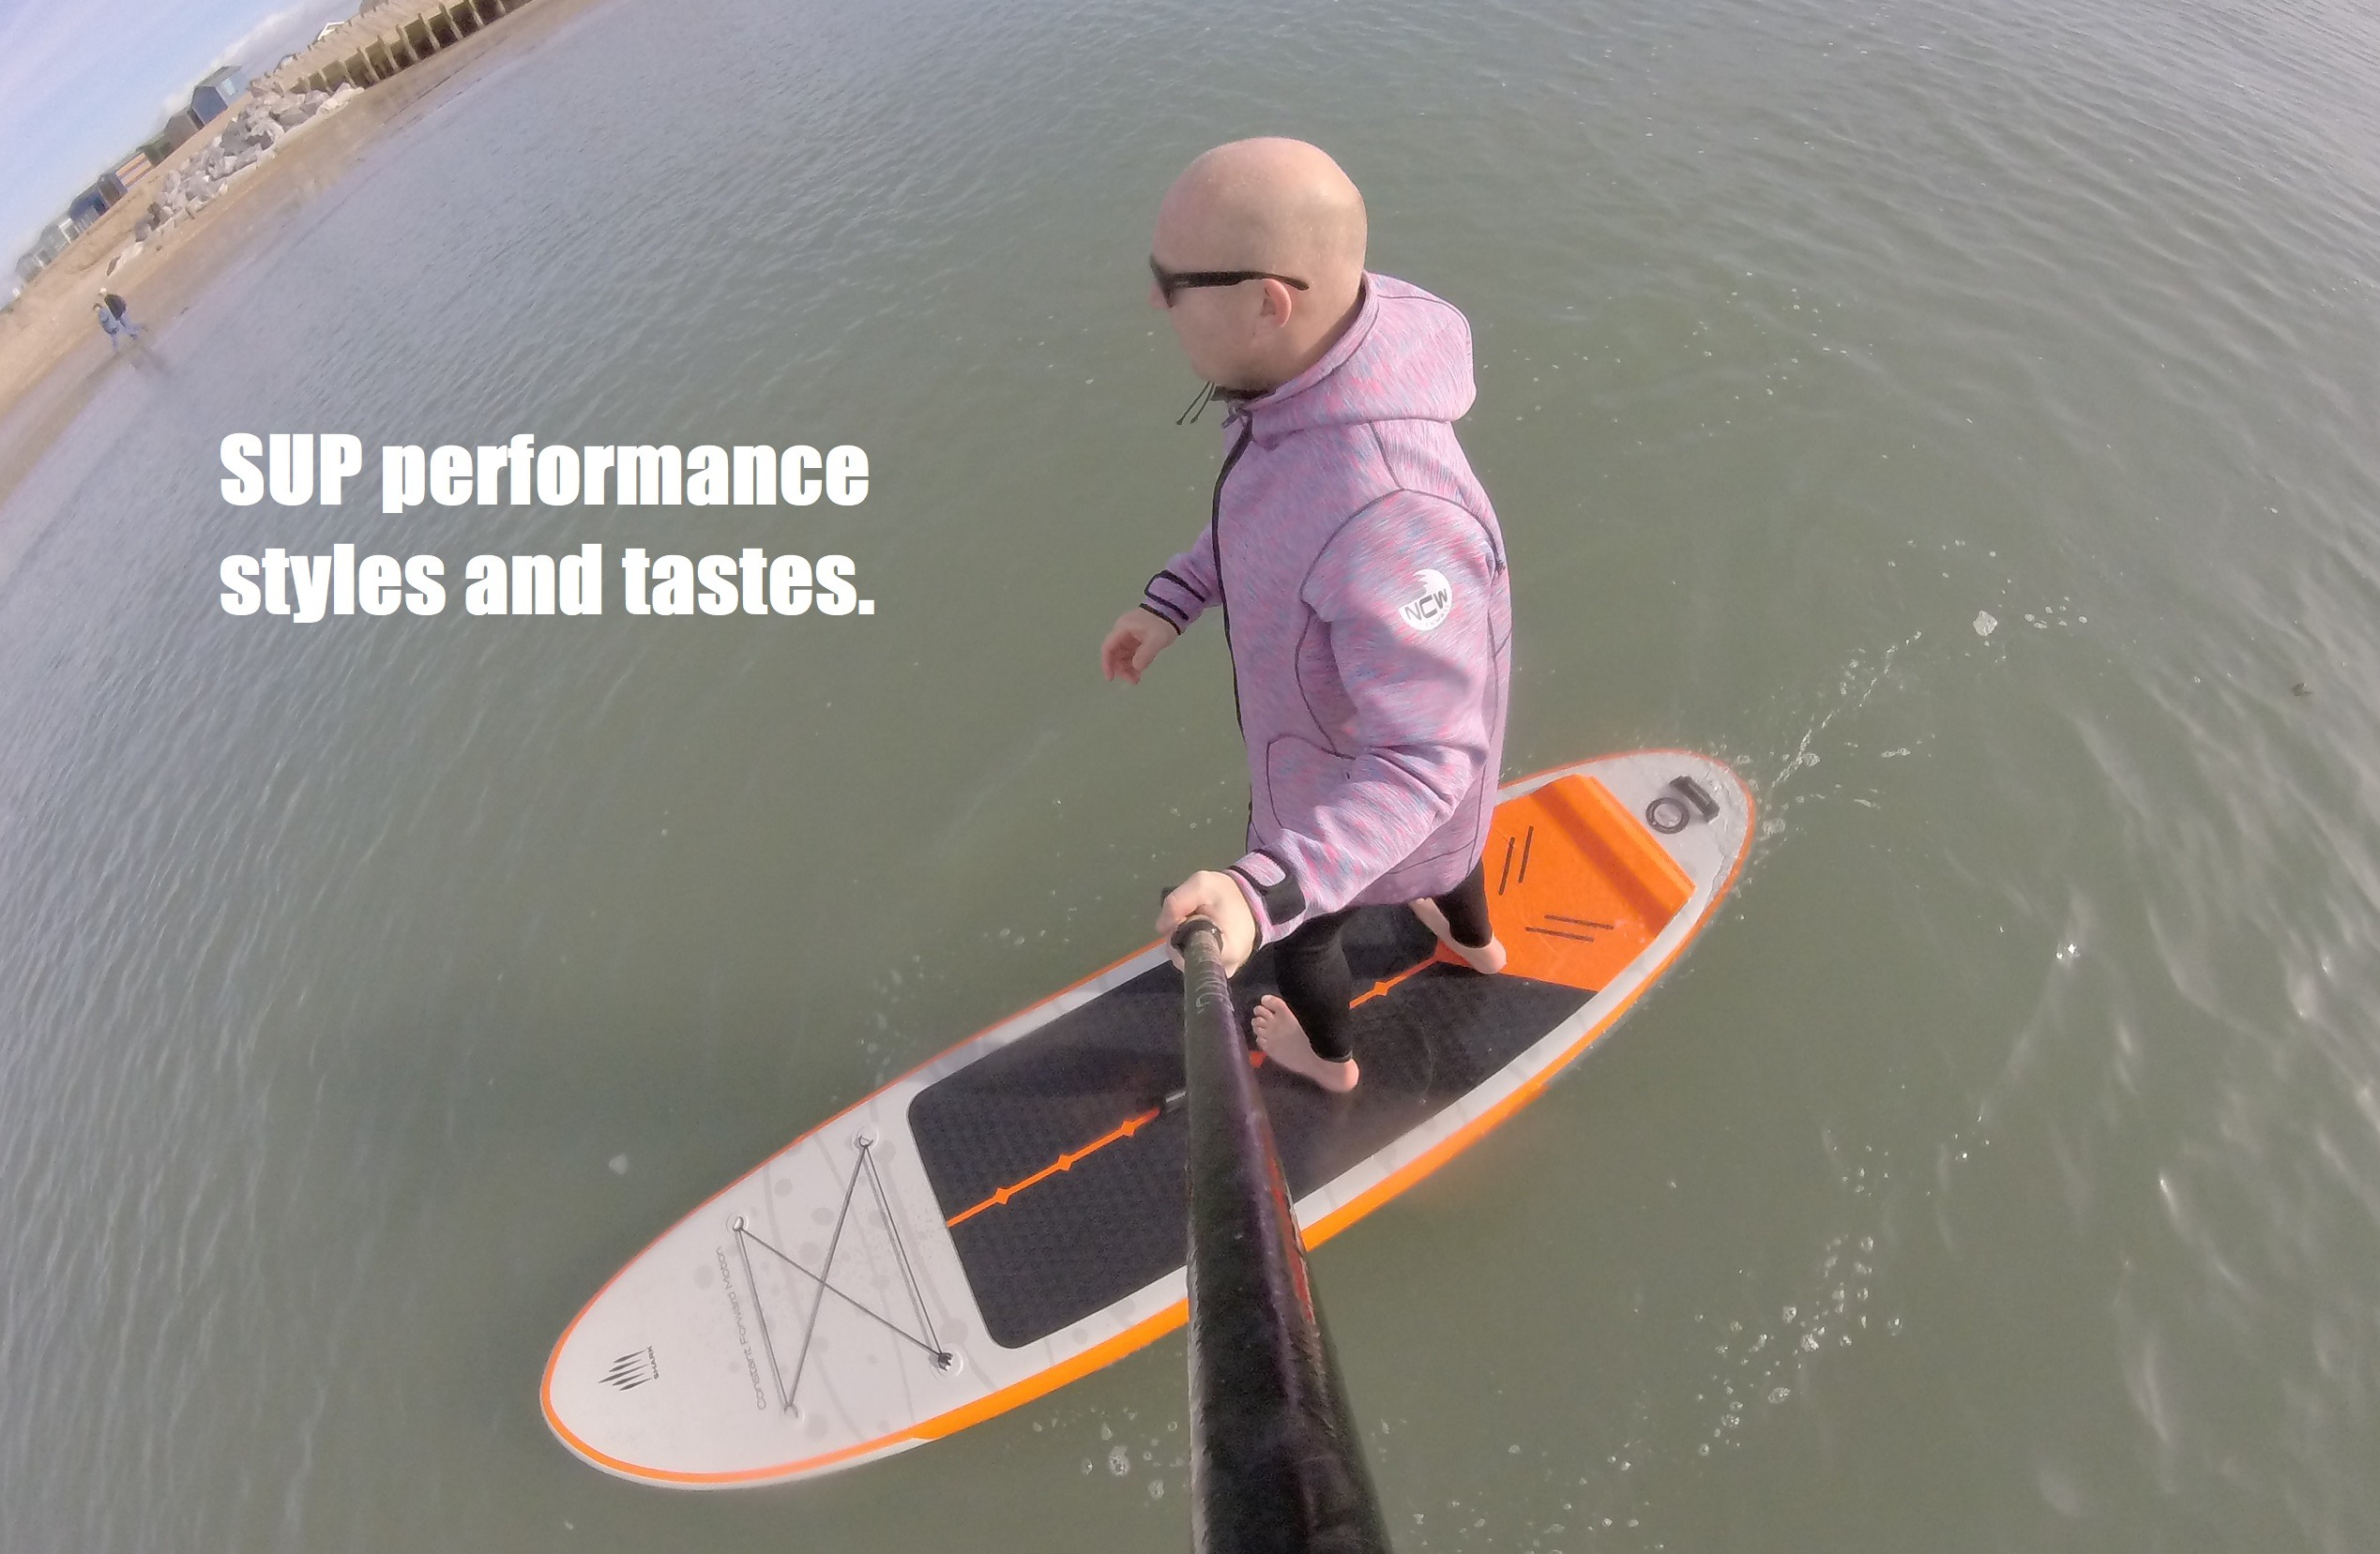 SUP performance styles and tastes.